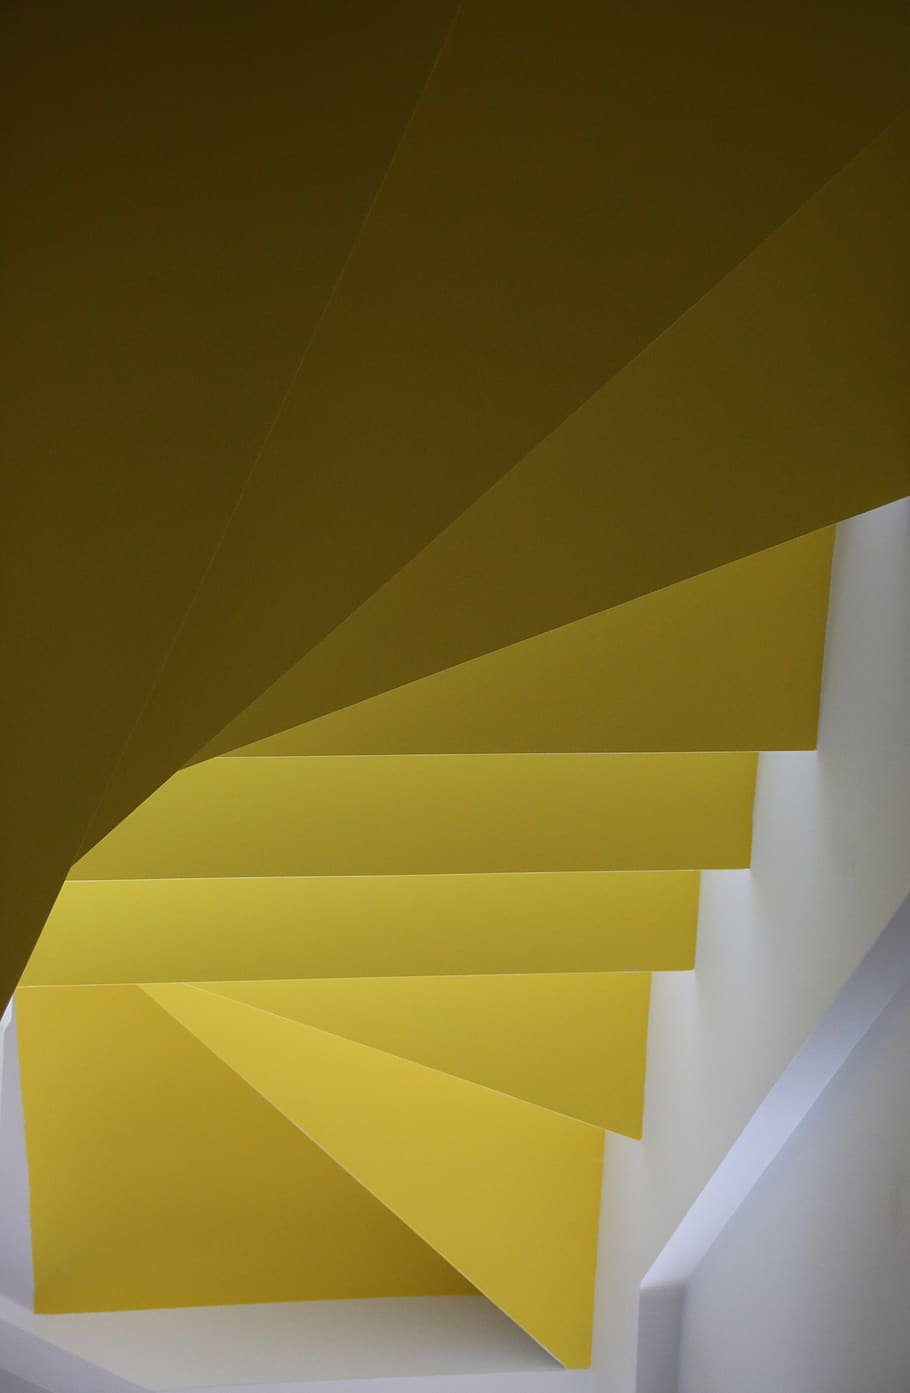 staircase, stairs, steps, yellow, modern, loft, architecture, interior, design, contemporary